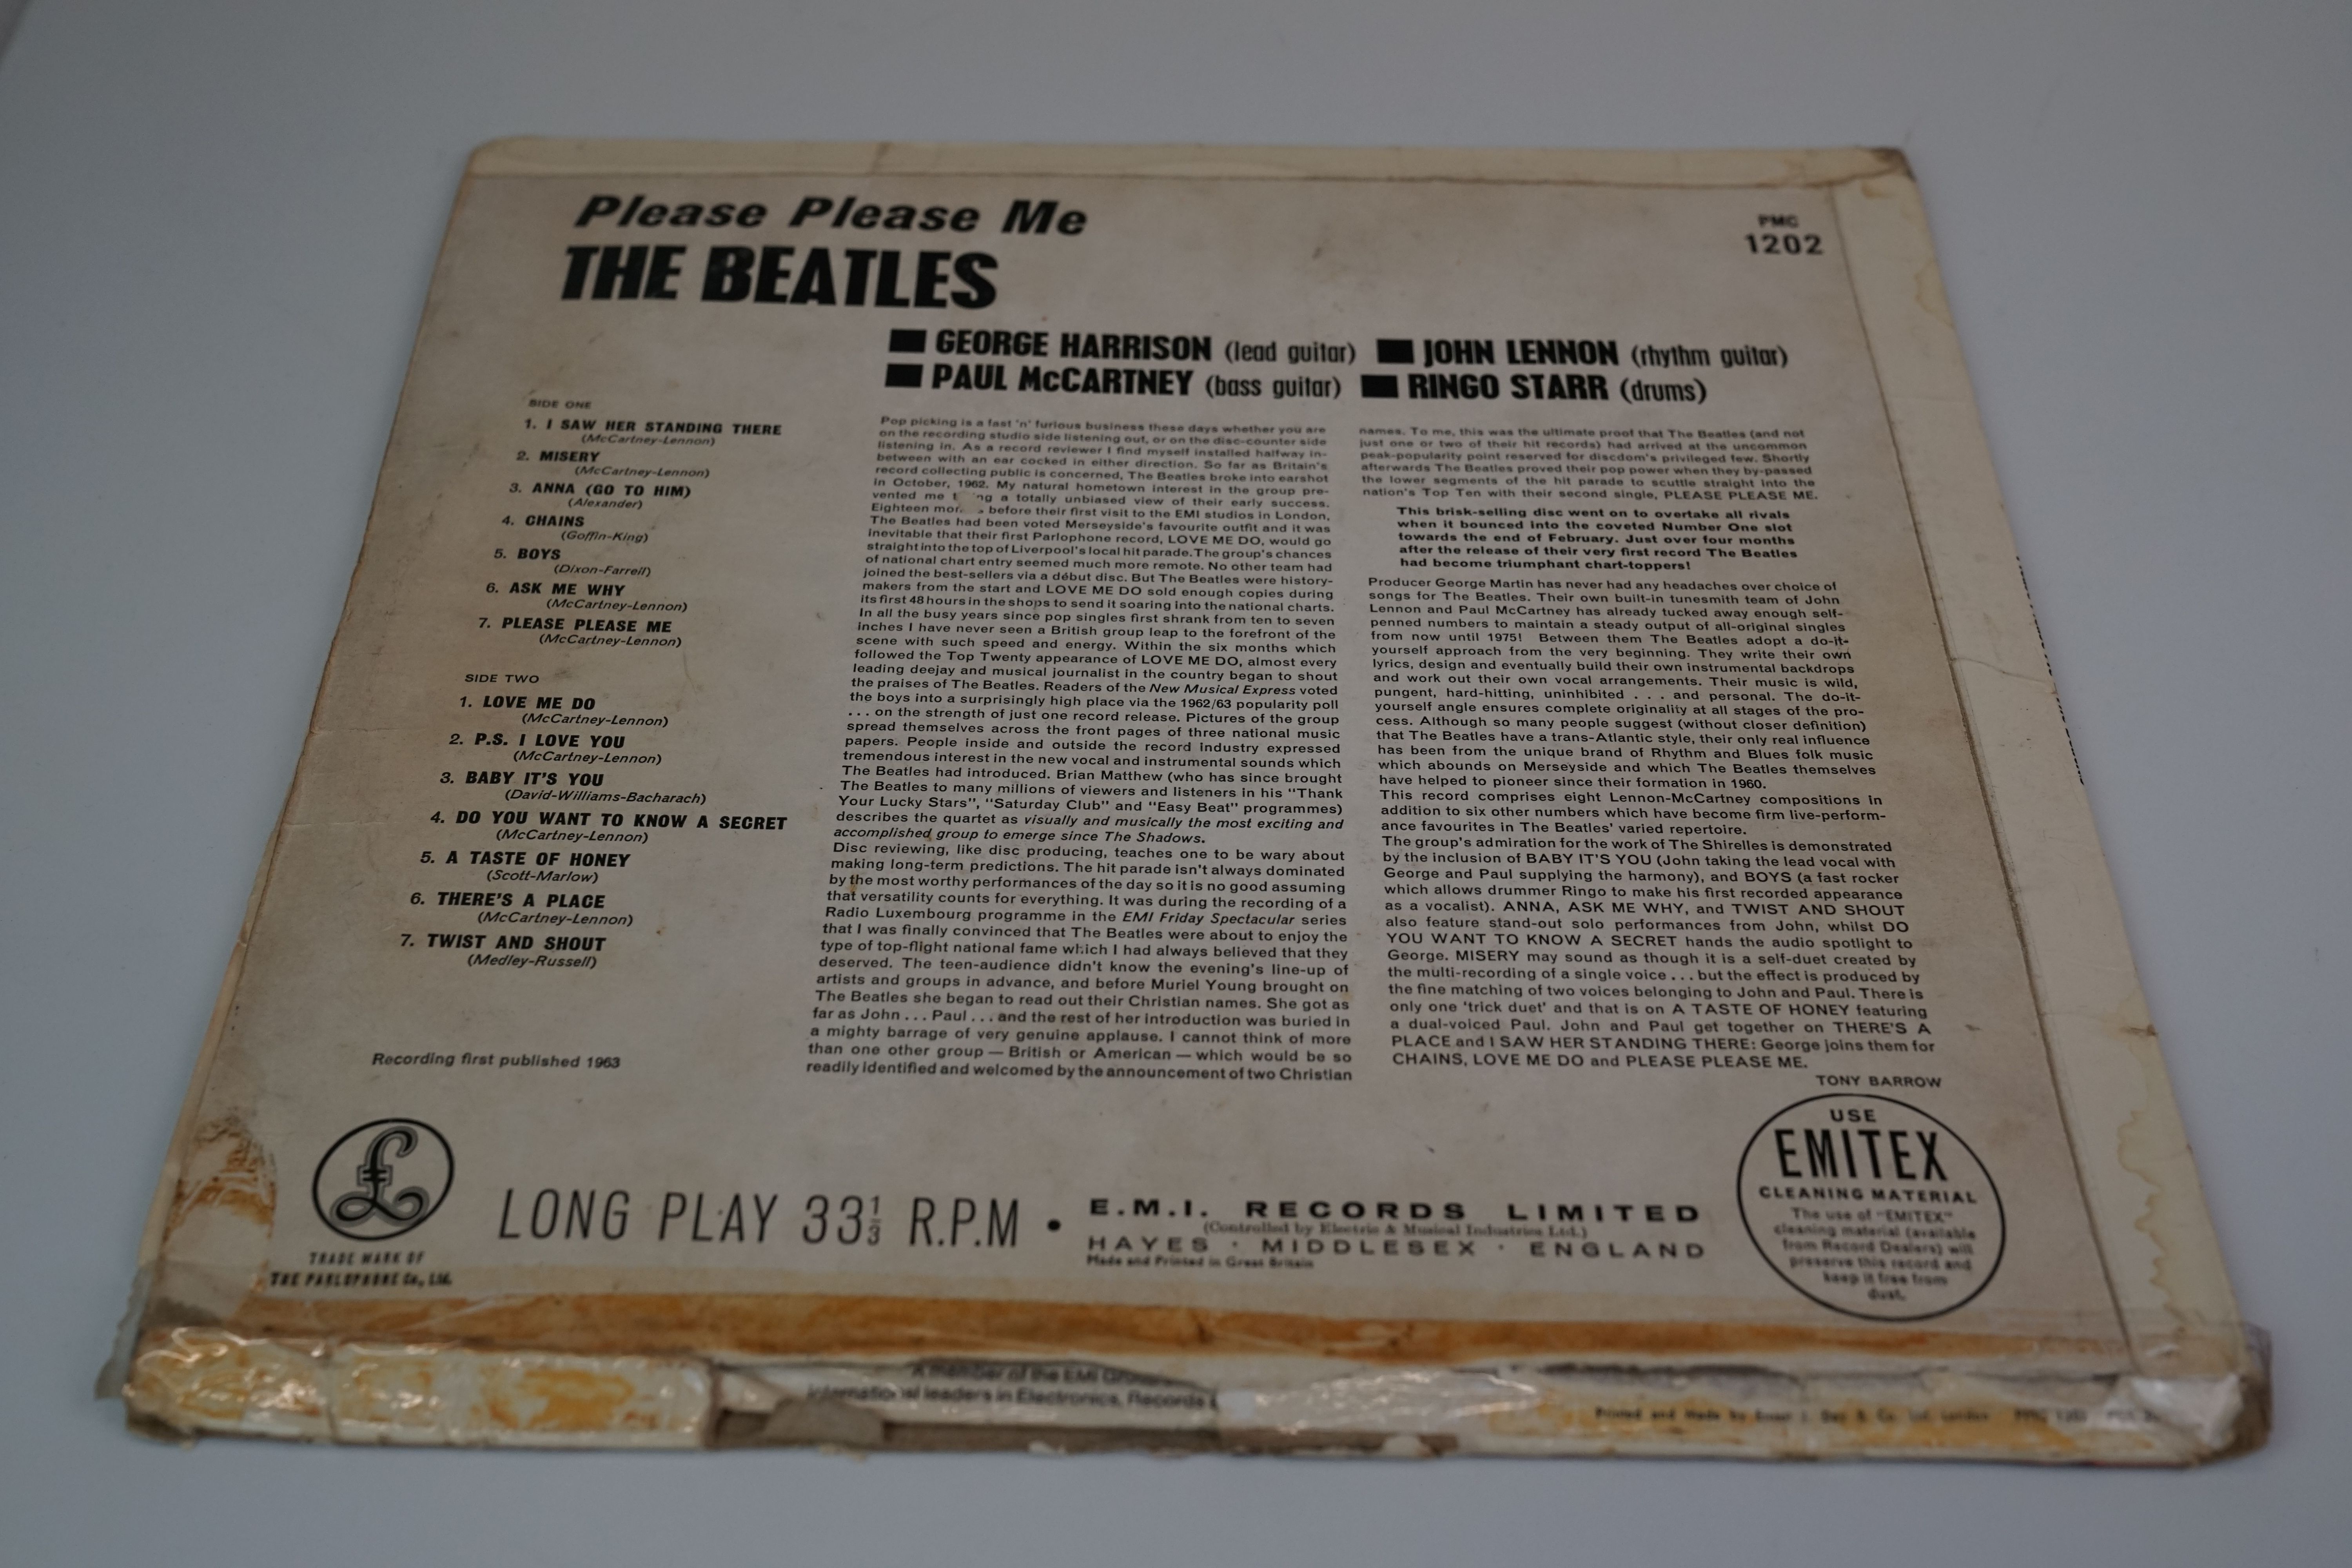 Vinyl - The Beatles Please Please Me (PMC 1202) Mono, early pressing with black and gold label, - Image 2 of 7